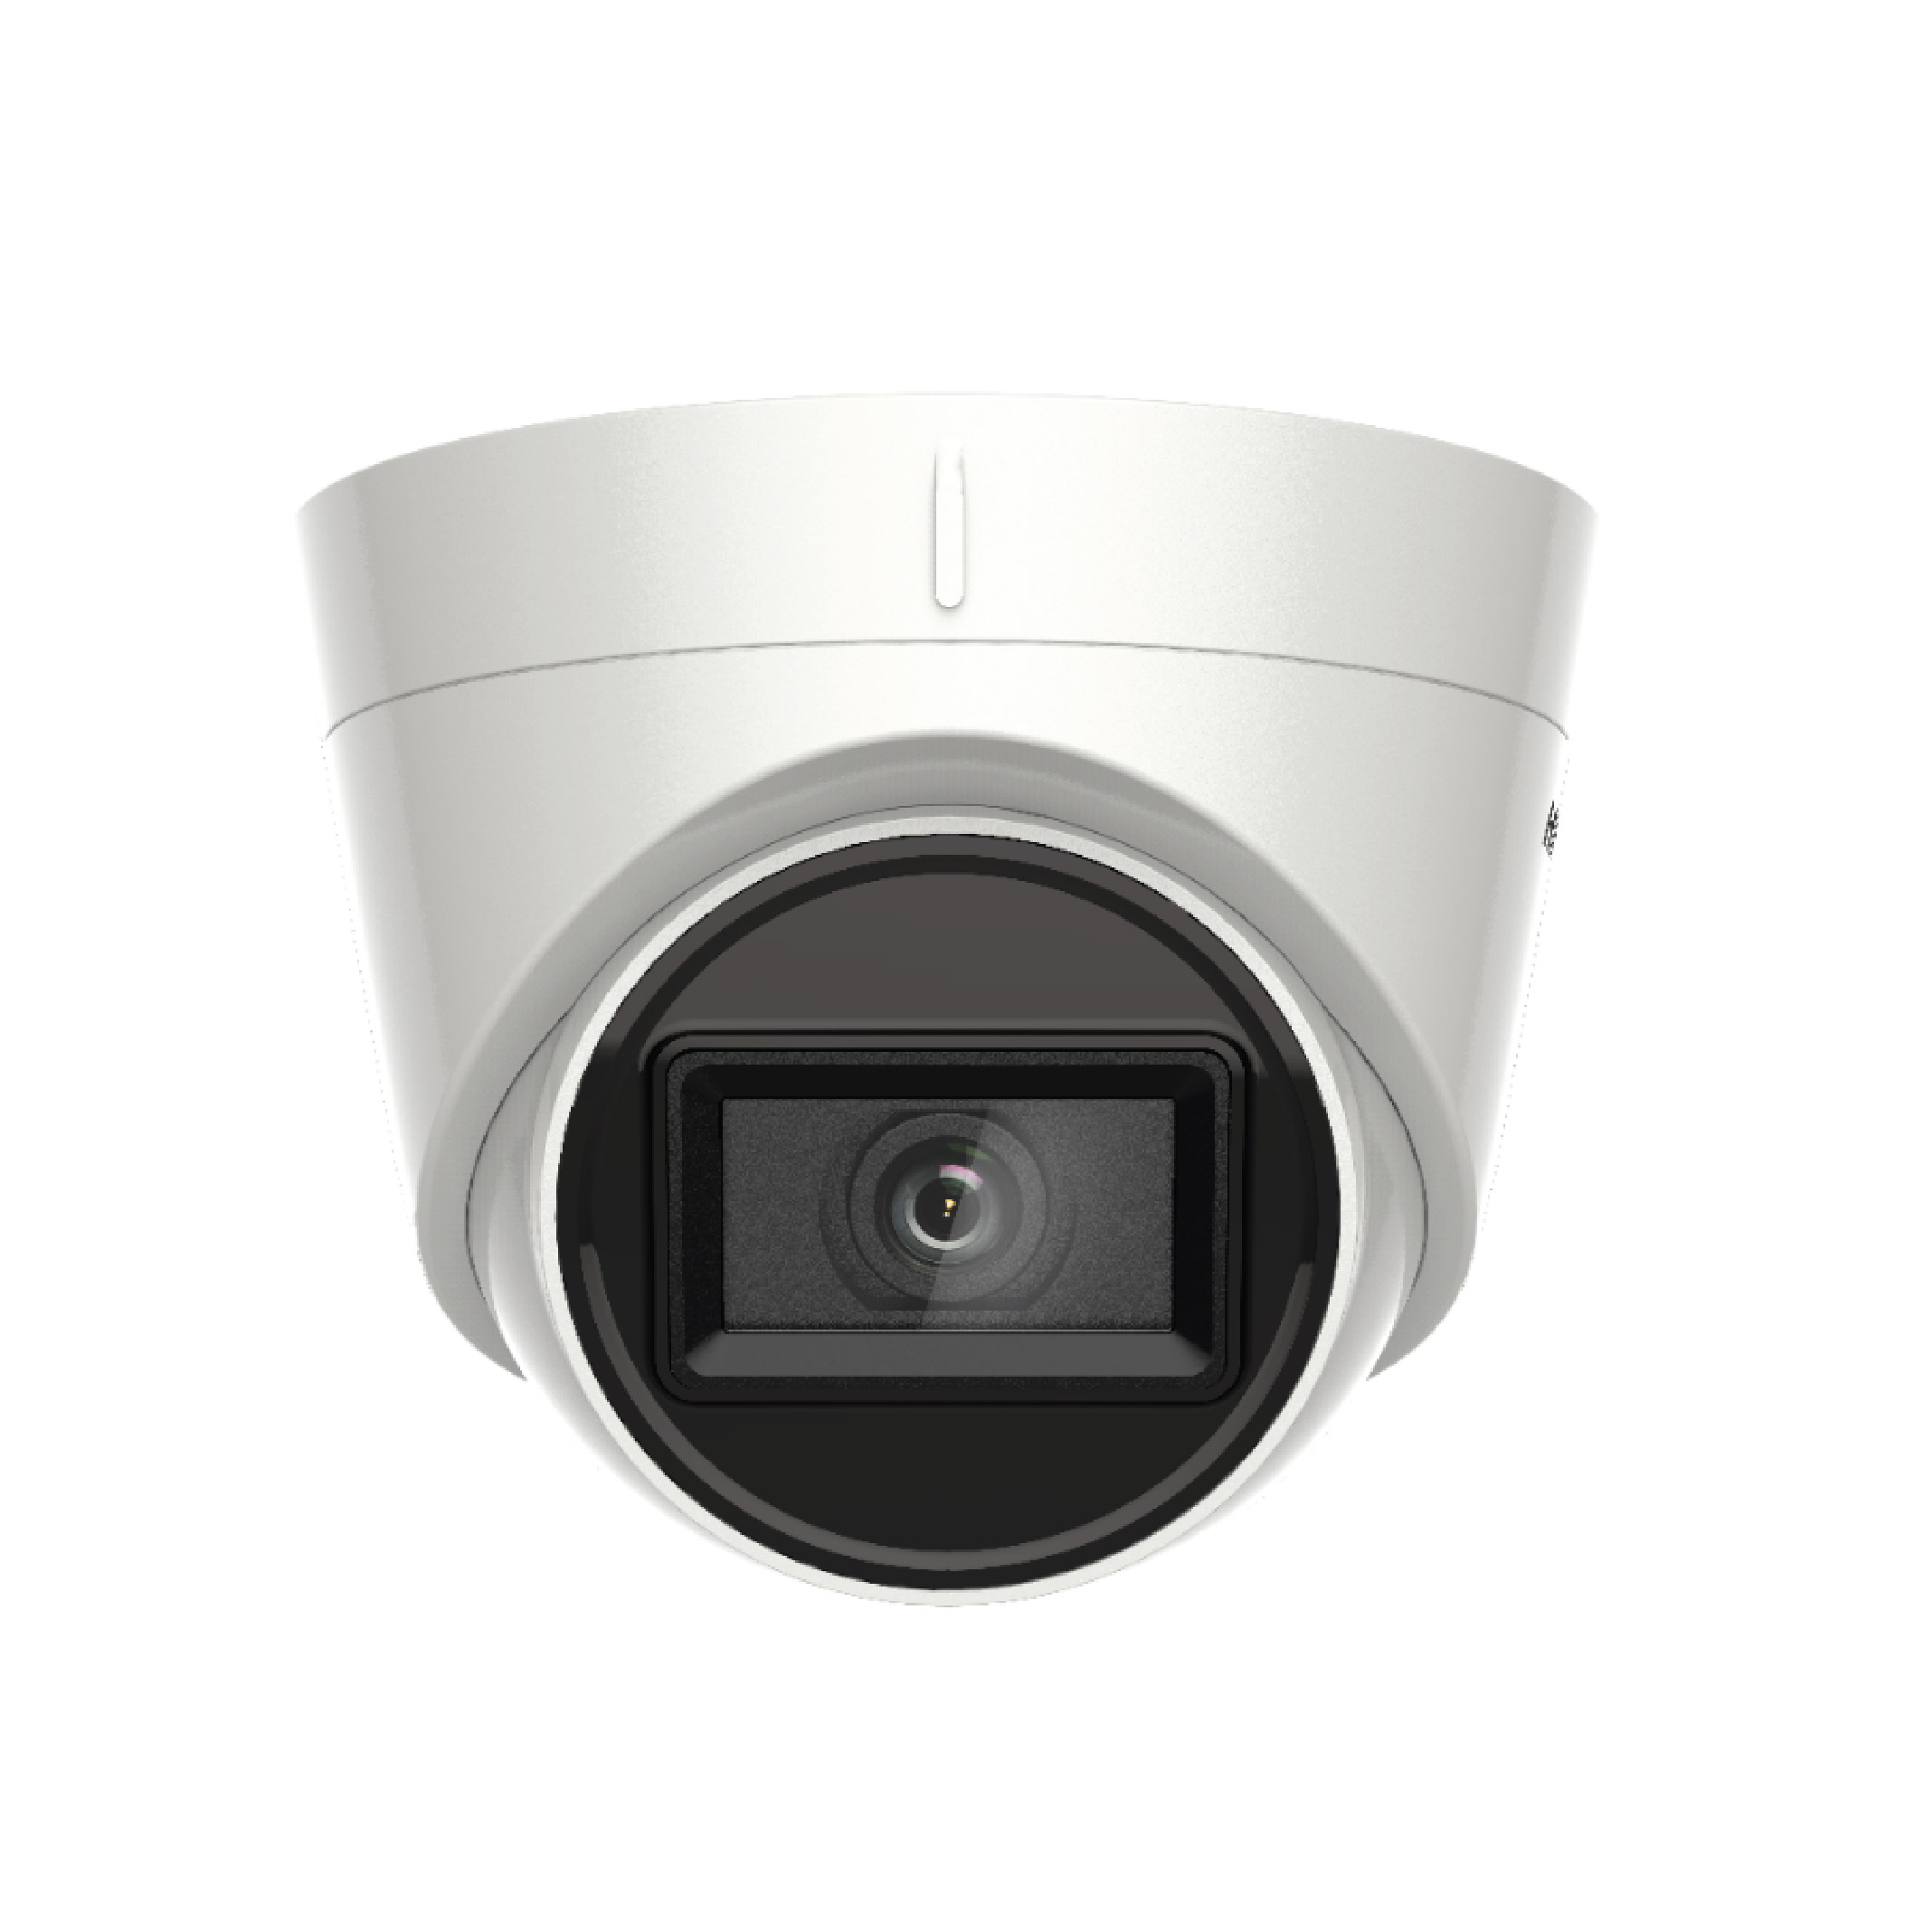 HIKVISION DS-2CE78D3T-IT3F Turbo HD Camera